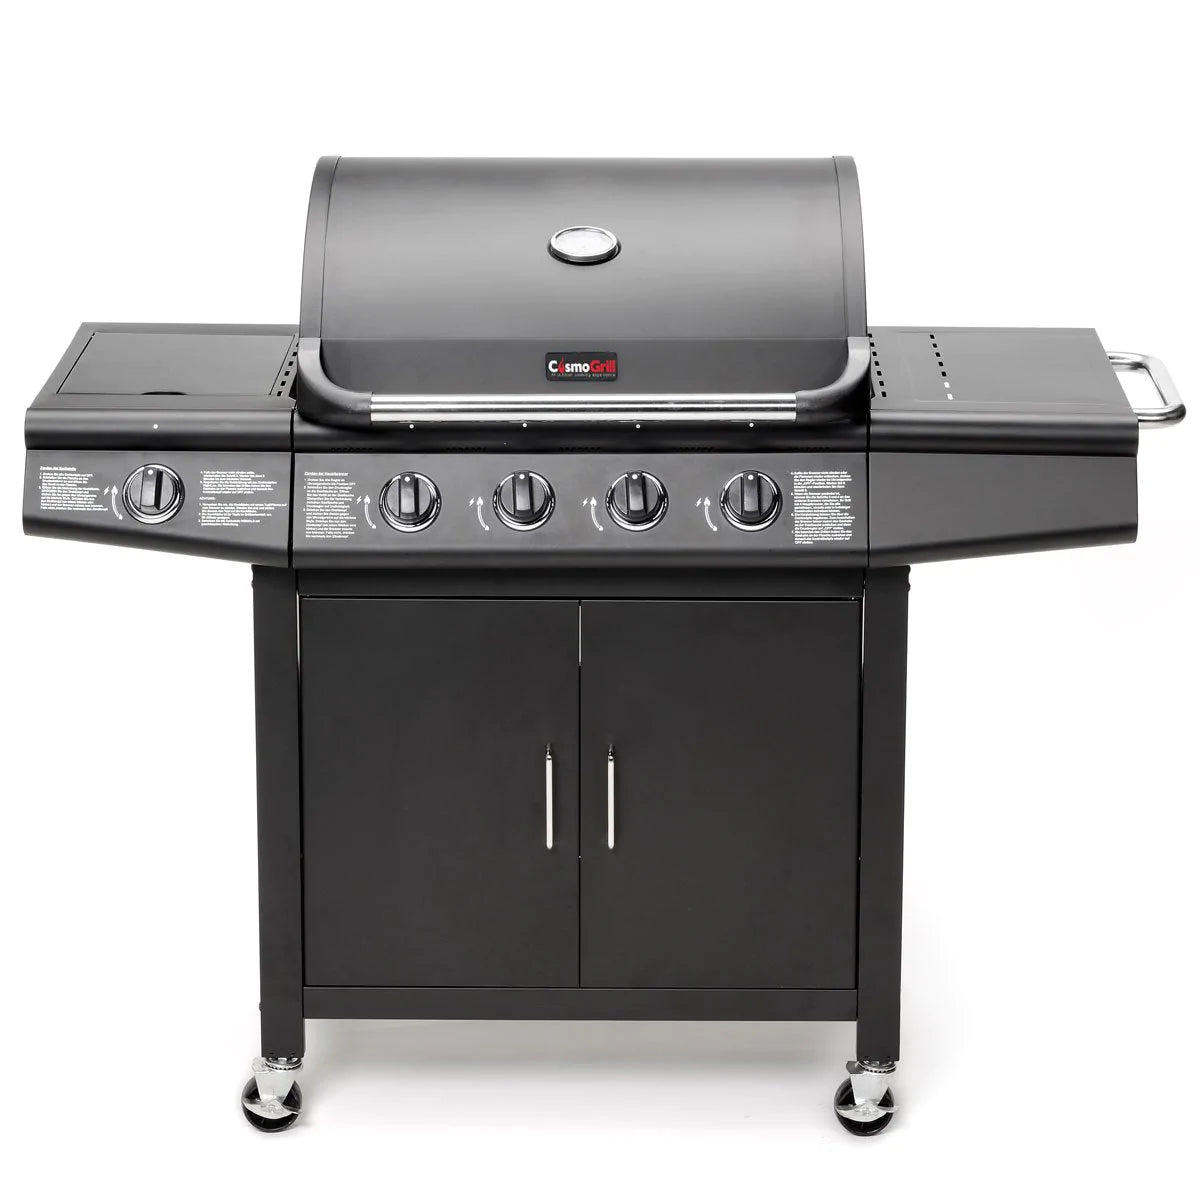 CosmoGrill Pro Series 4+1 Gas Barbecue Front View